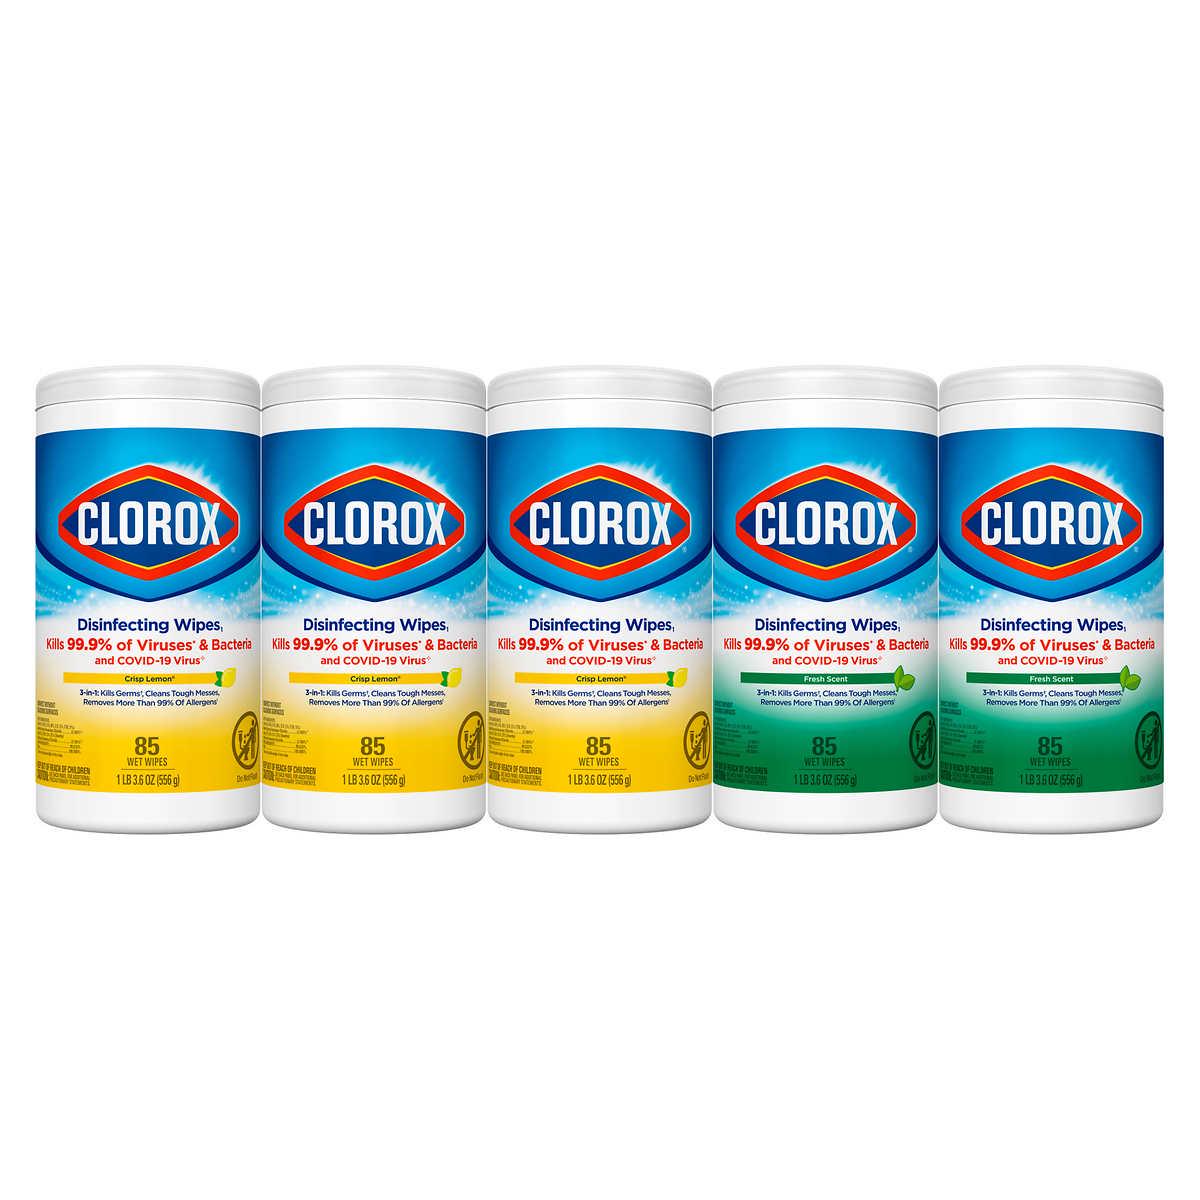 Clorox Disinfecting Wipes, Variety Pack, 85-count, 5-pack